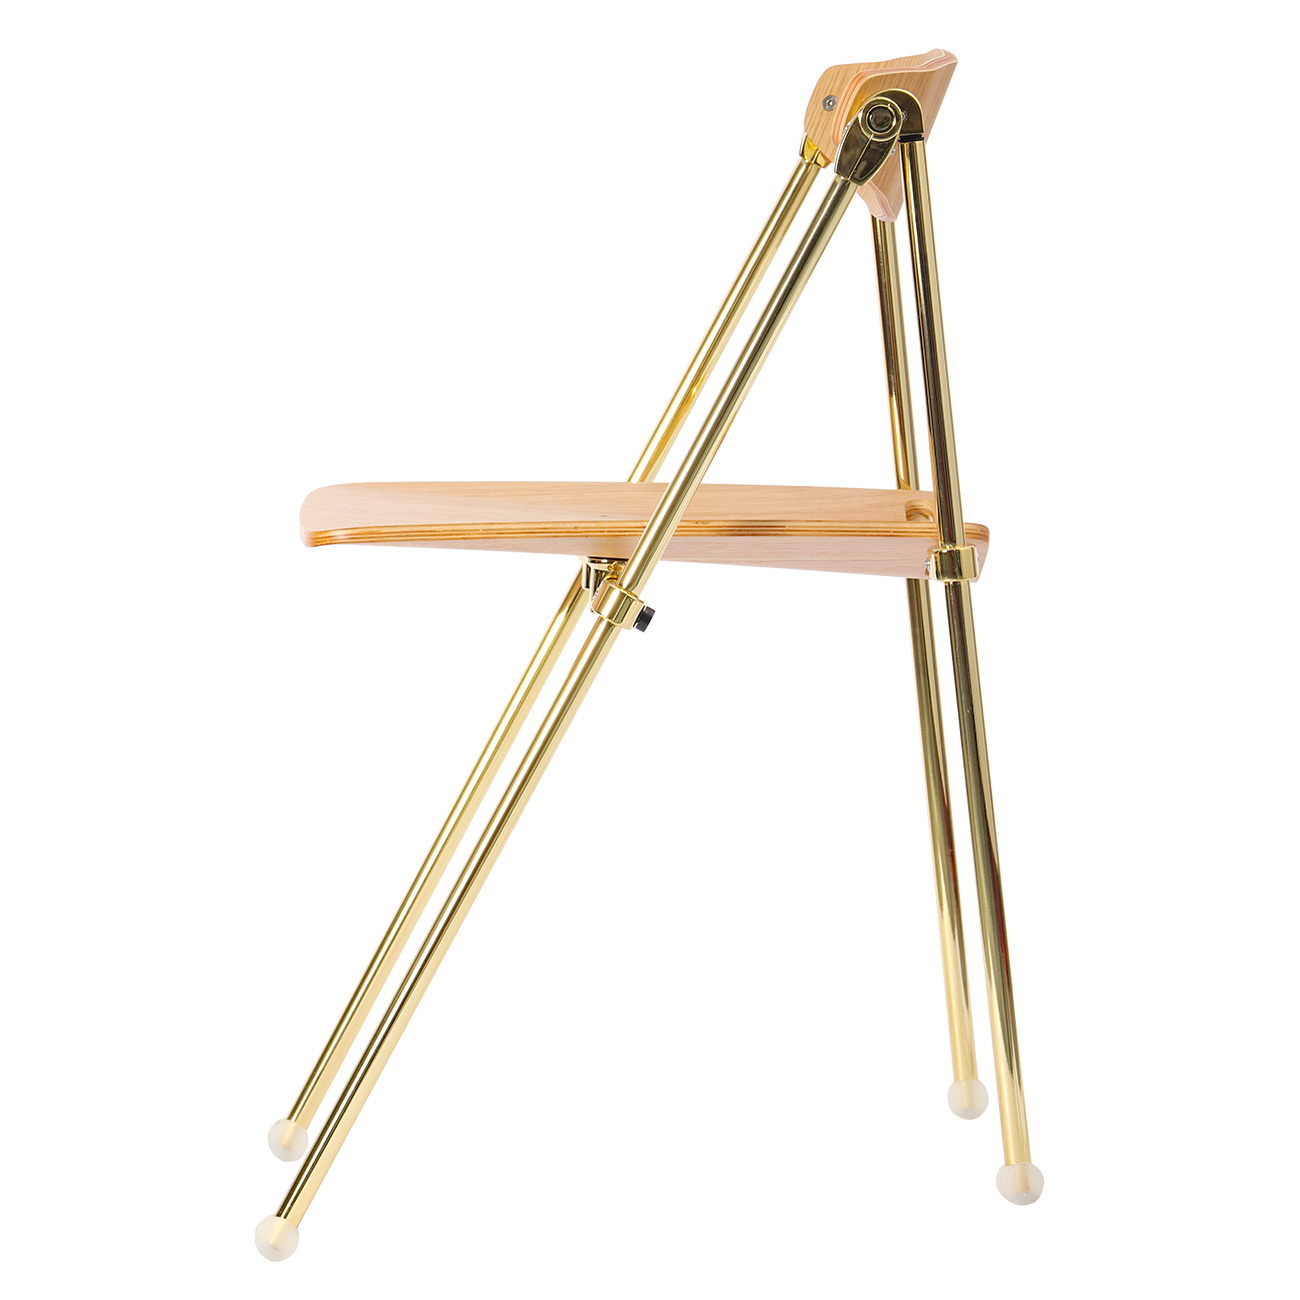 Modern Folding Chair with Wooden Seat and Gold Metal Frame